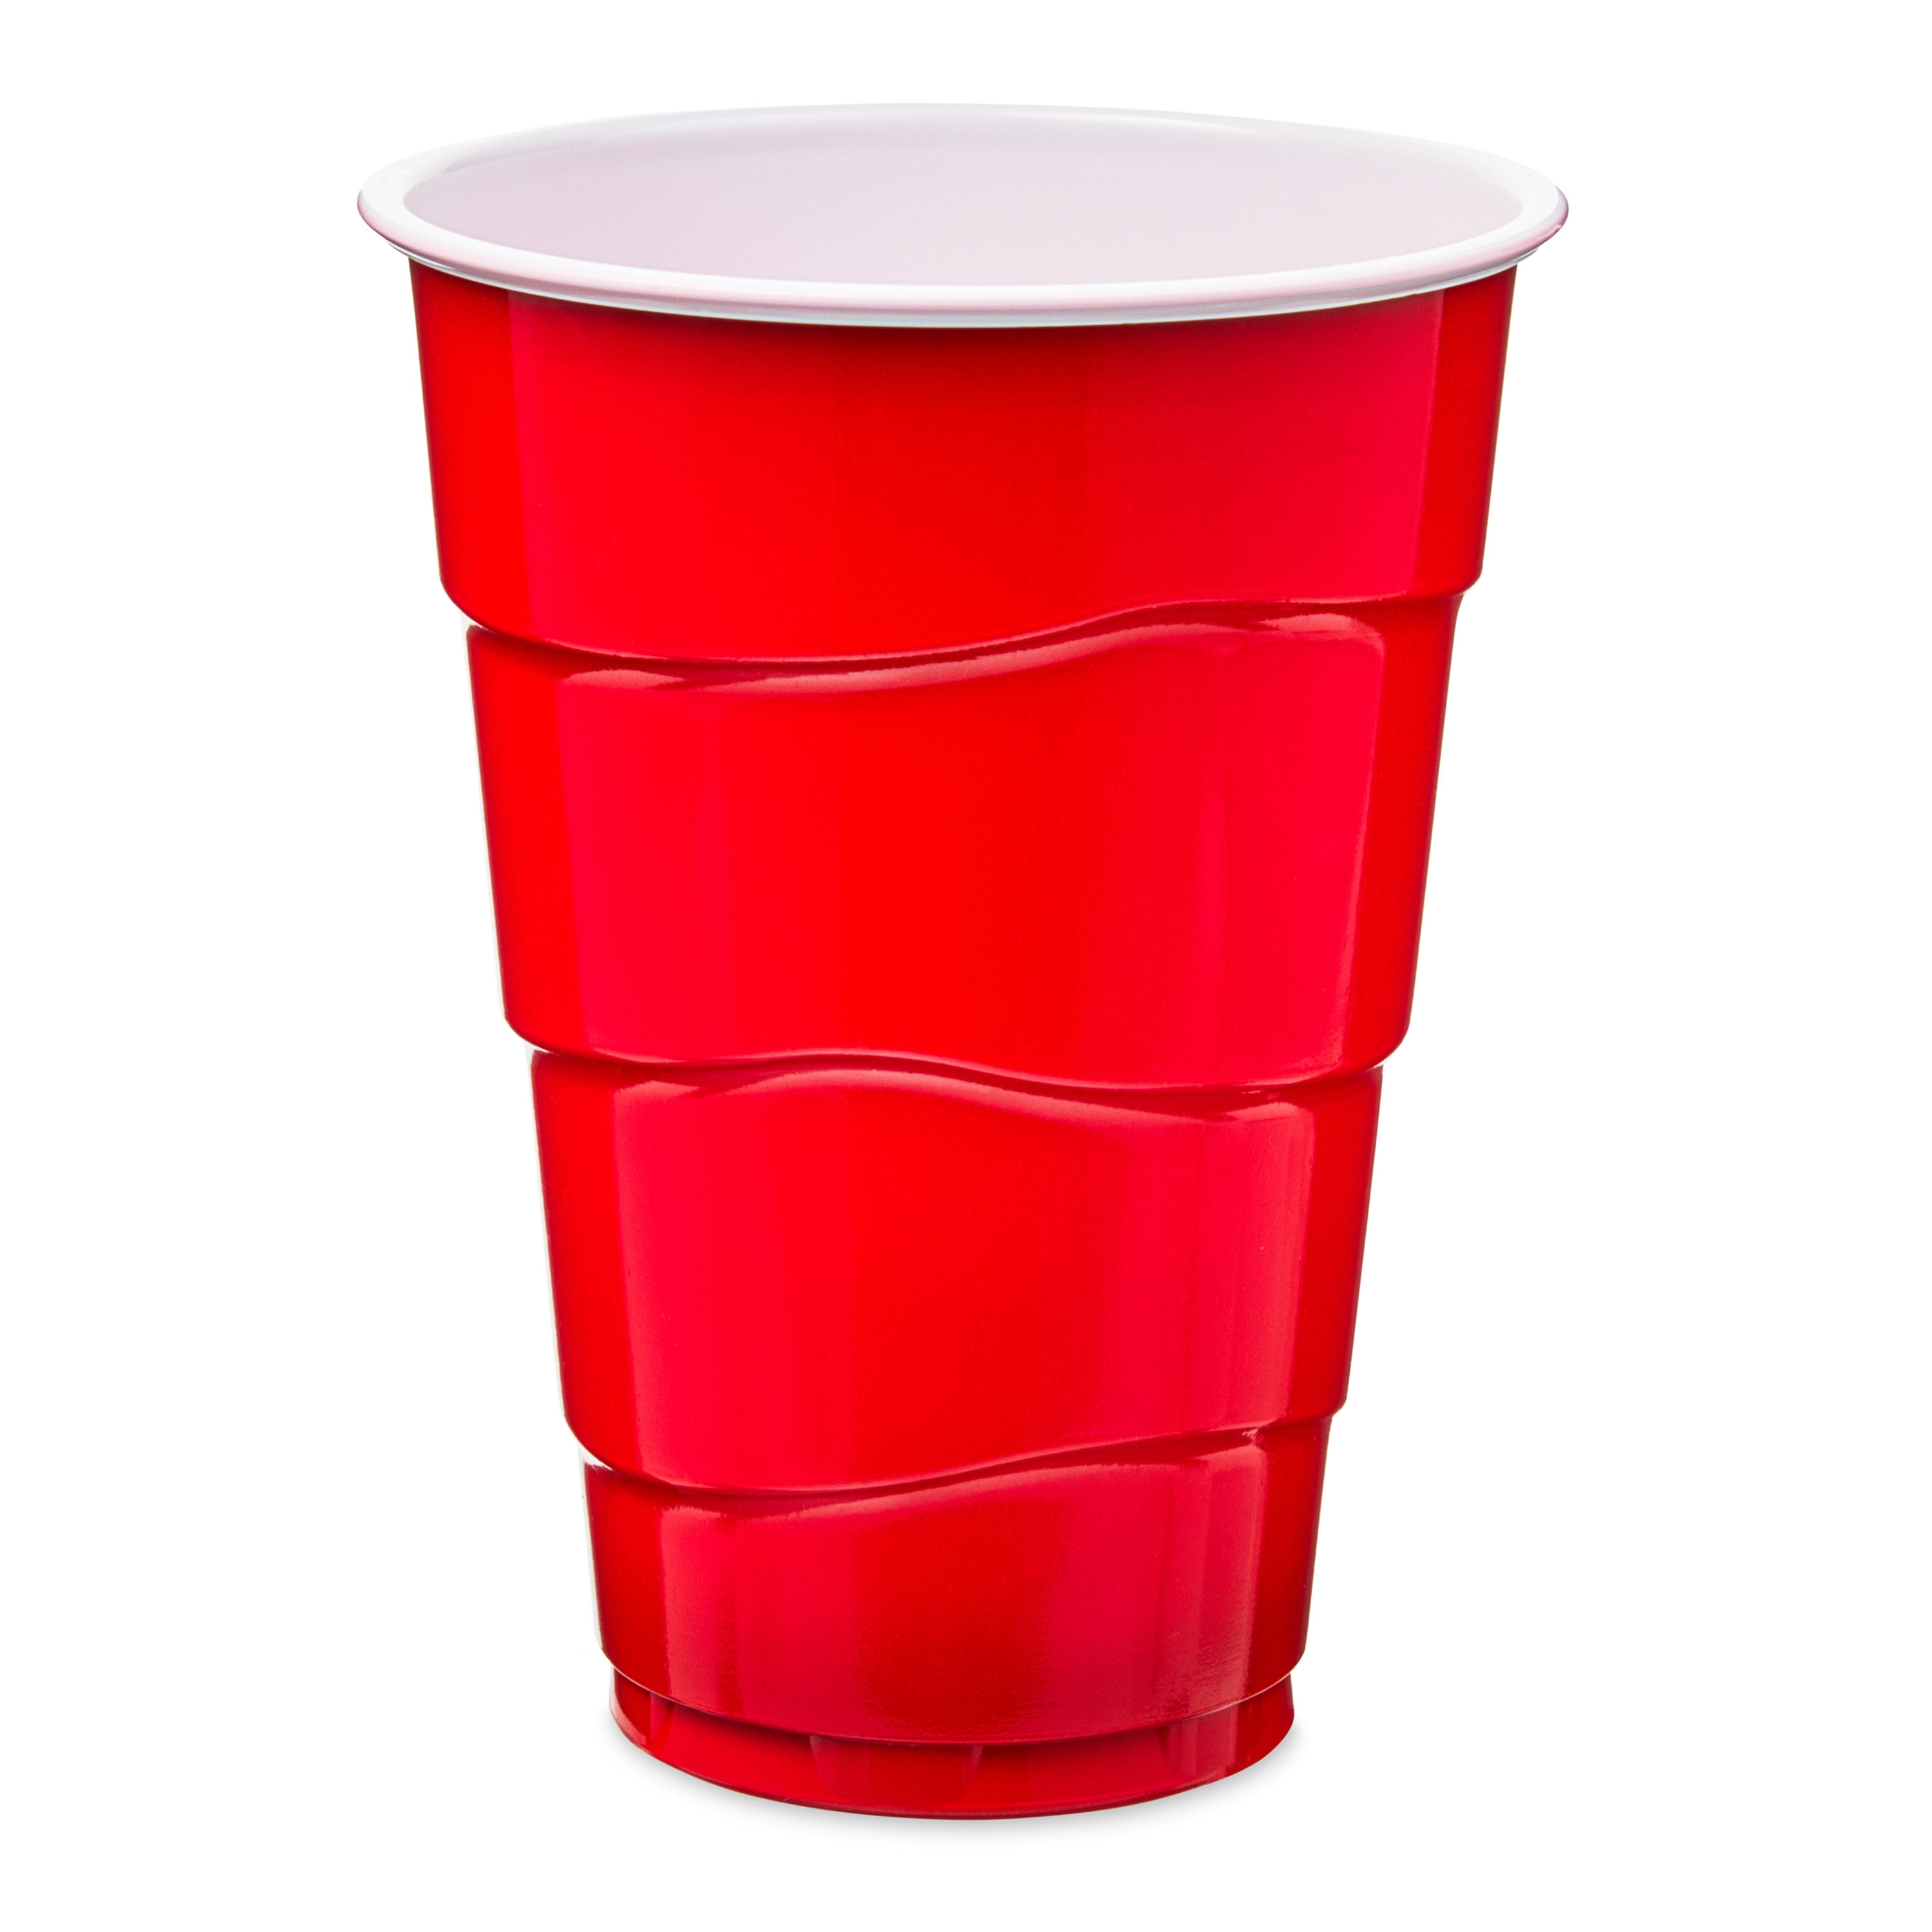 10 Things You Didn't Know About Red Solo Cups